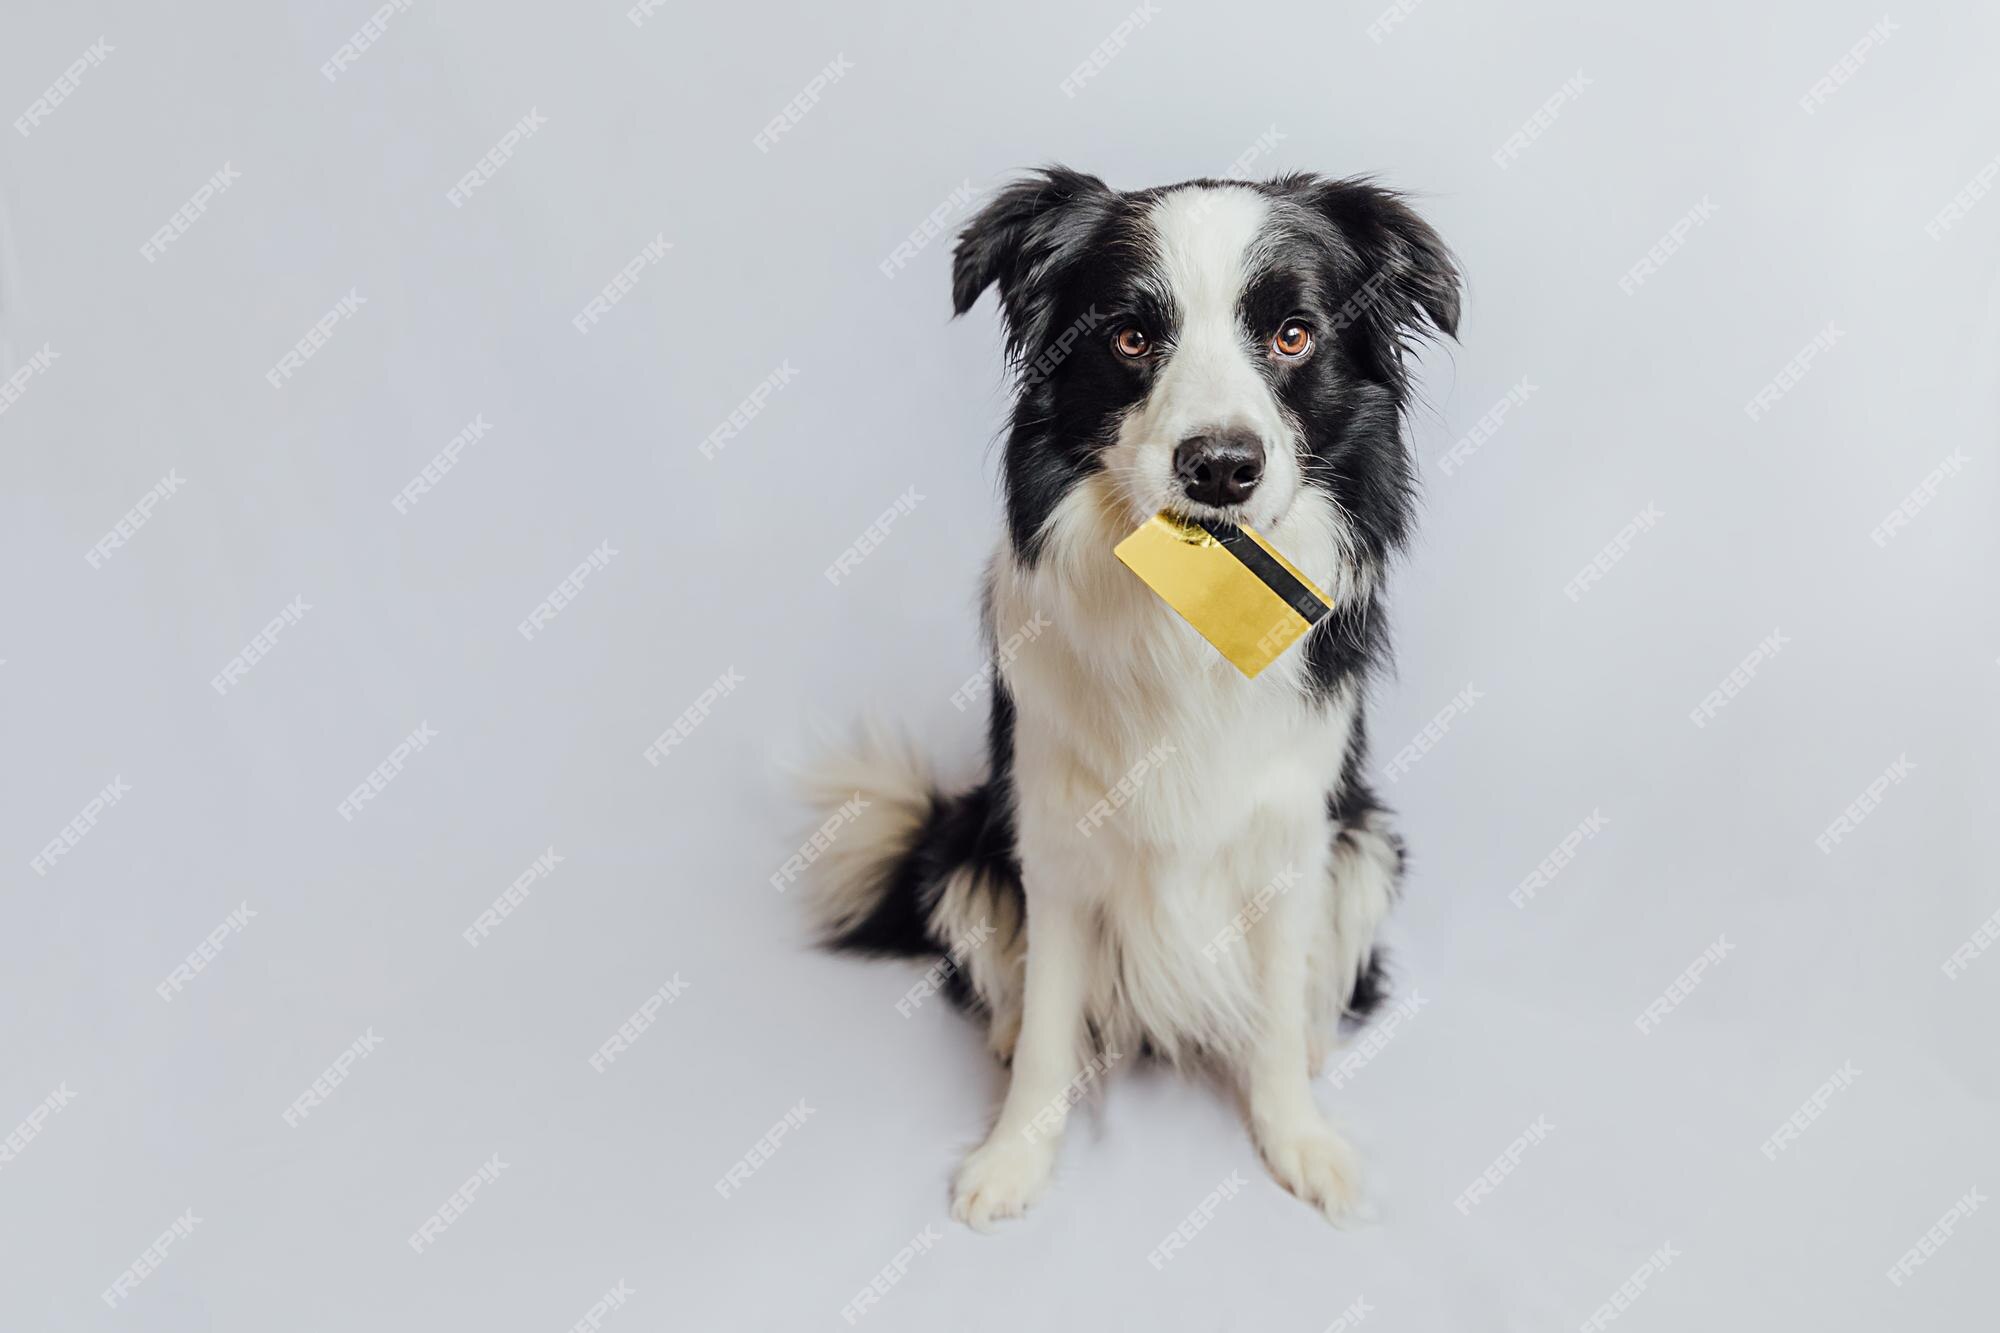 Premium Photo | Cute puppy dog border collie holding gold bank credit card  in mouth isolated on white background little dog with puppy eyes funny face  waiting online sale shopping investment banking